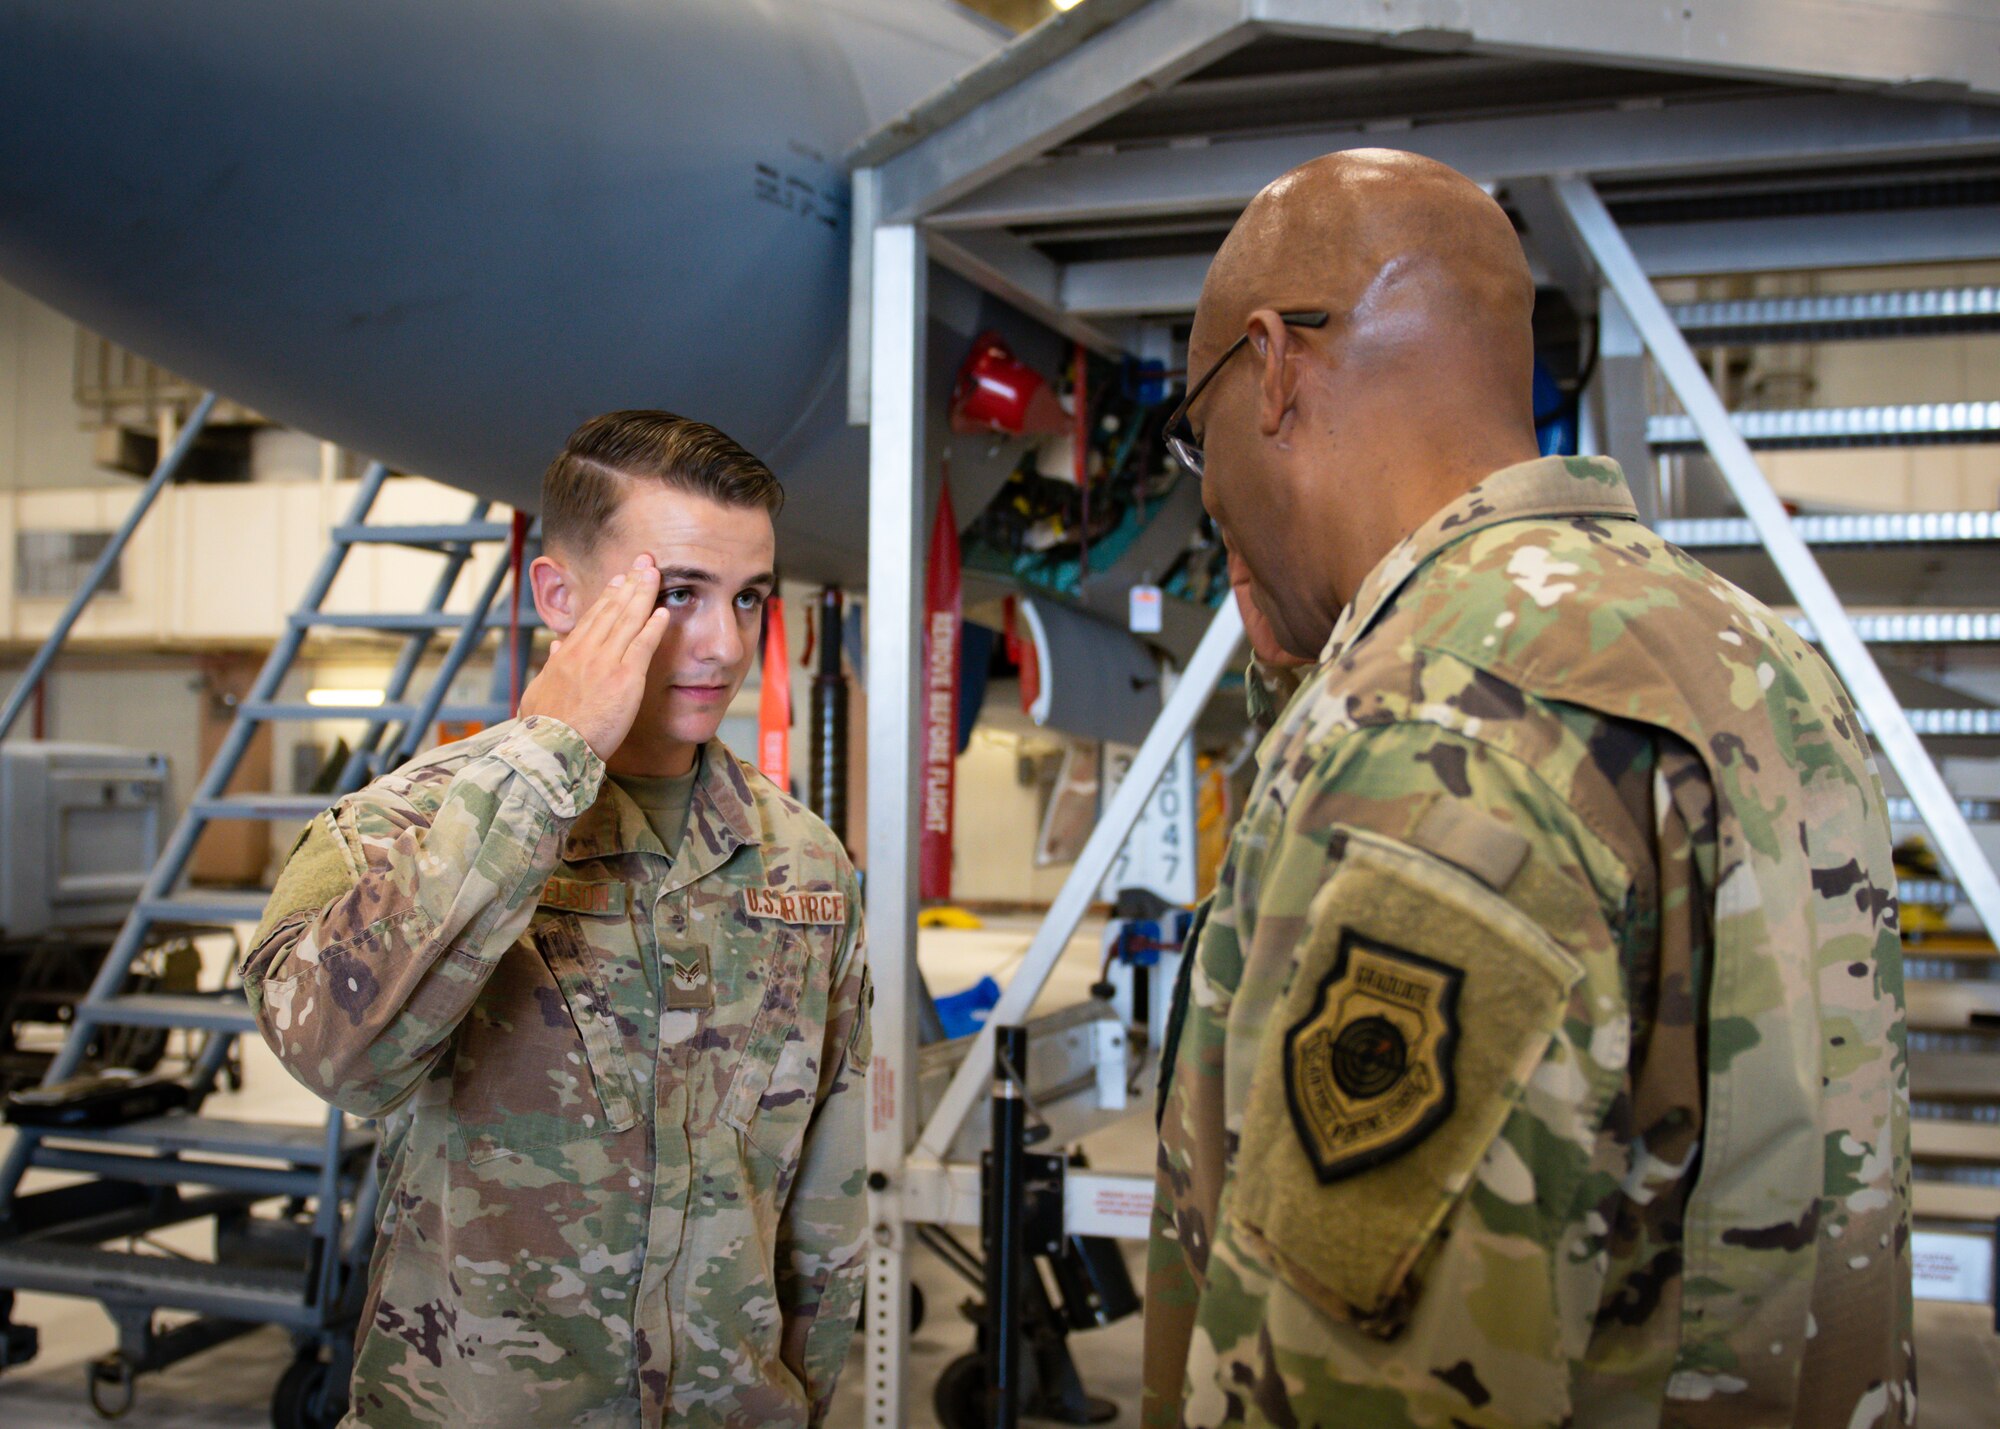 U.S. Air Force Senior Airman Robert Nickelson, 18th Munitions Squadron precision guided munitions crew chief, salutes after being coined by Gen. CQ Brown, Jr., Pacific Air Forces commander, at Kadena Air Base, Japan, Nov. 12, 2019. During the tour, Brown coined Airmen from different units as a way of thanks and recognition of their superior performance. (U.S. Air Force photo by Staff Sgt. Benjamin Raughton)